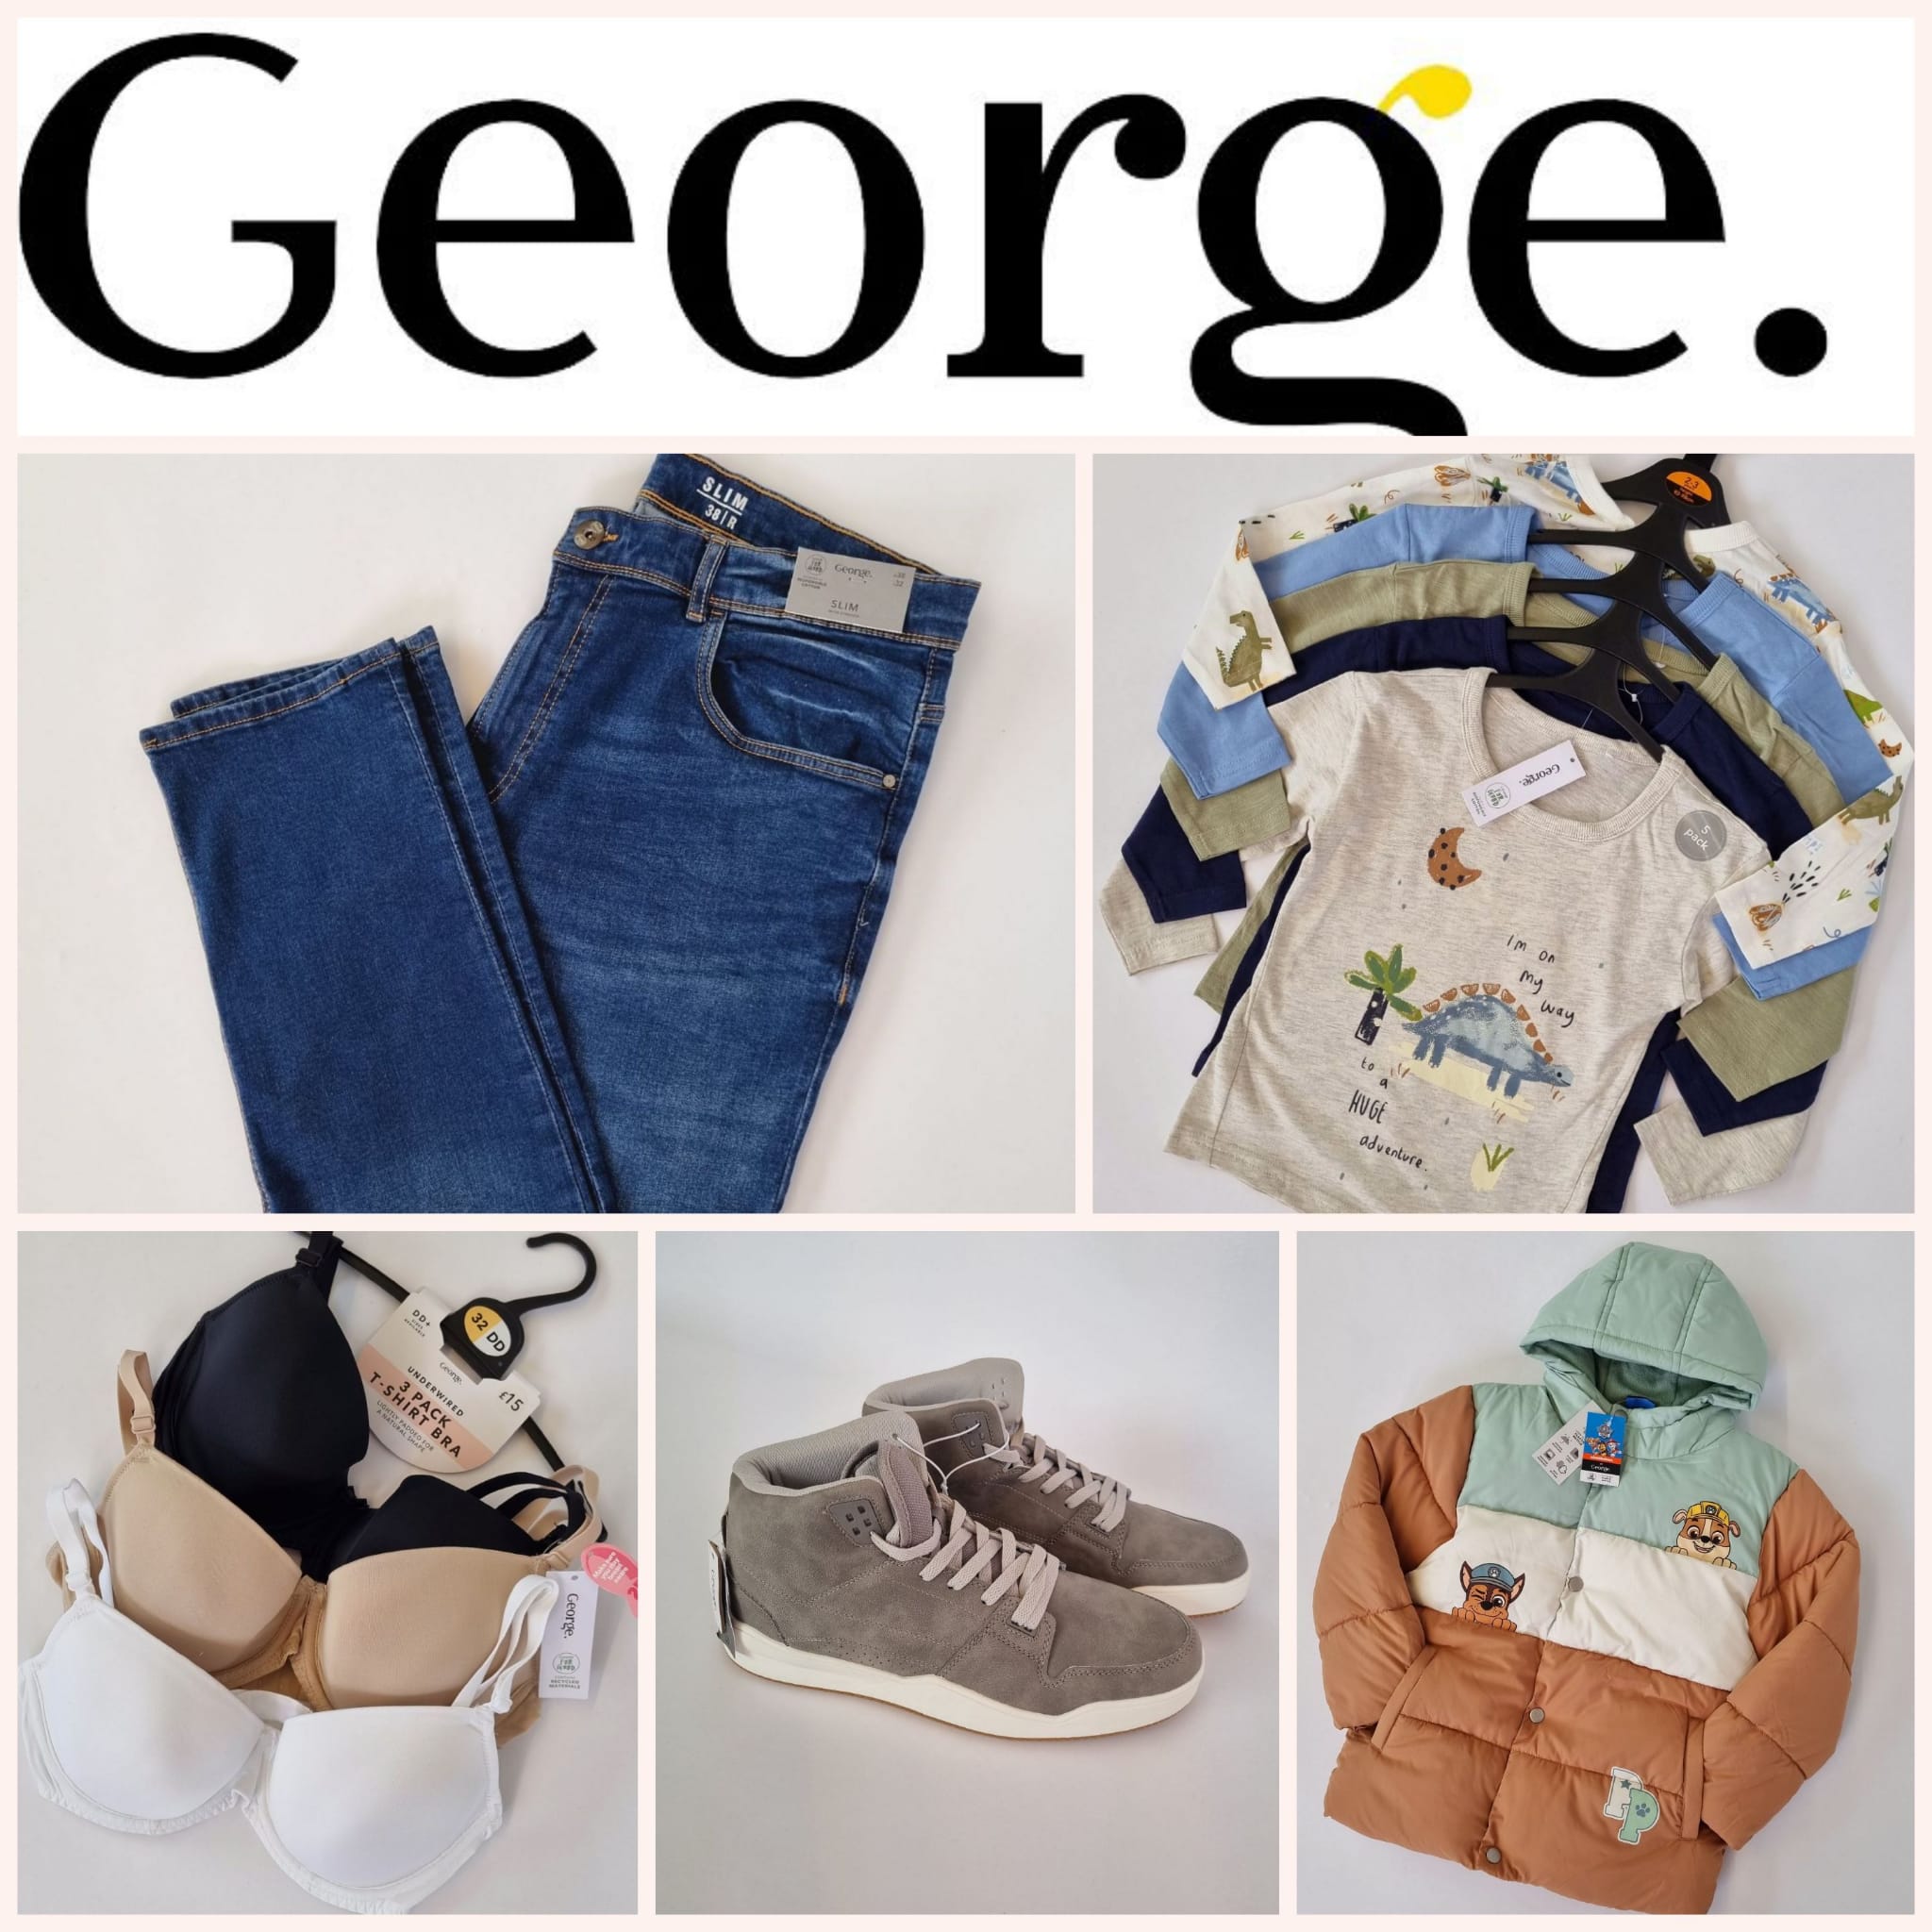 Mix of clothes and accessories from George 